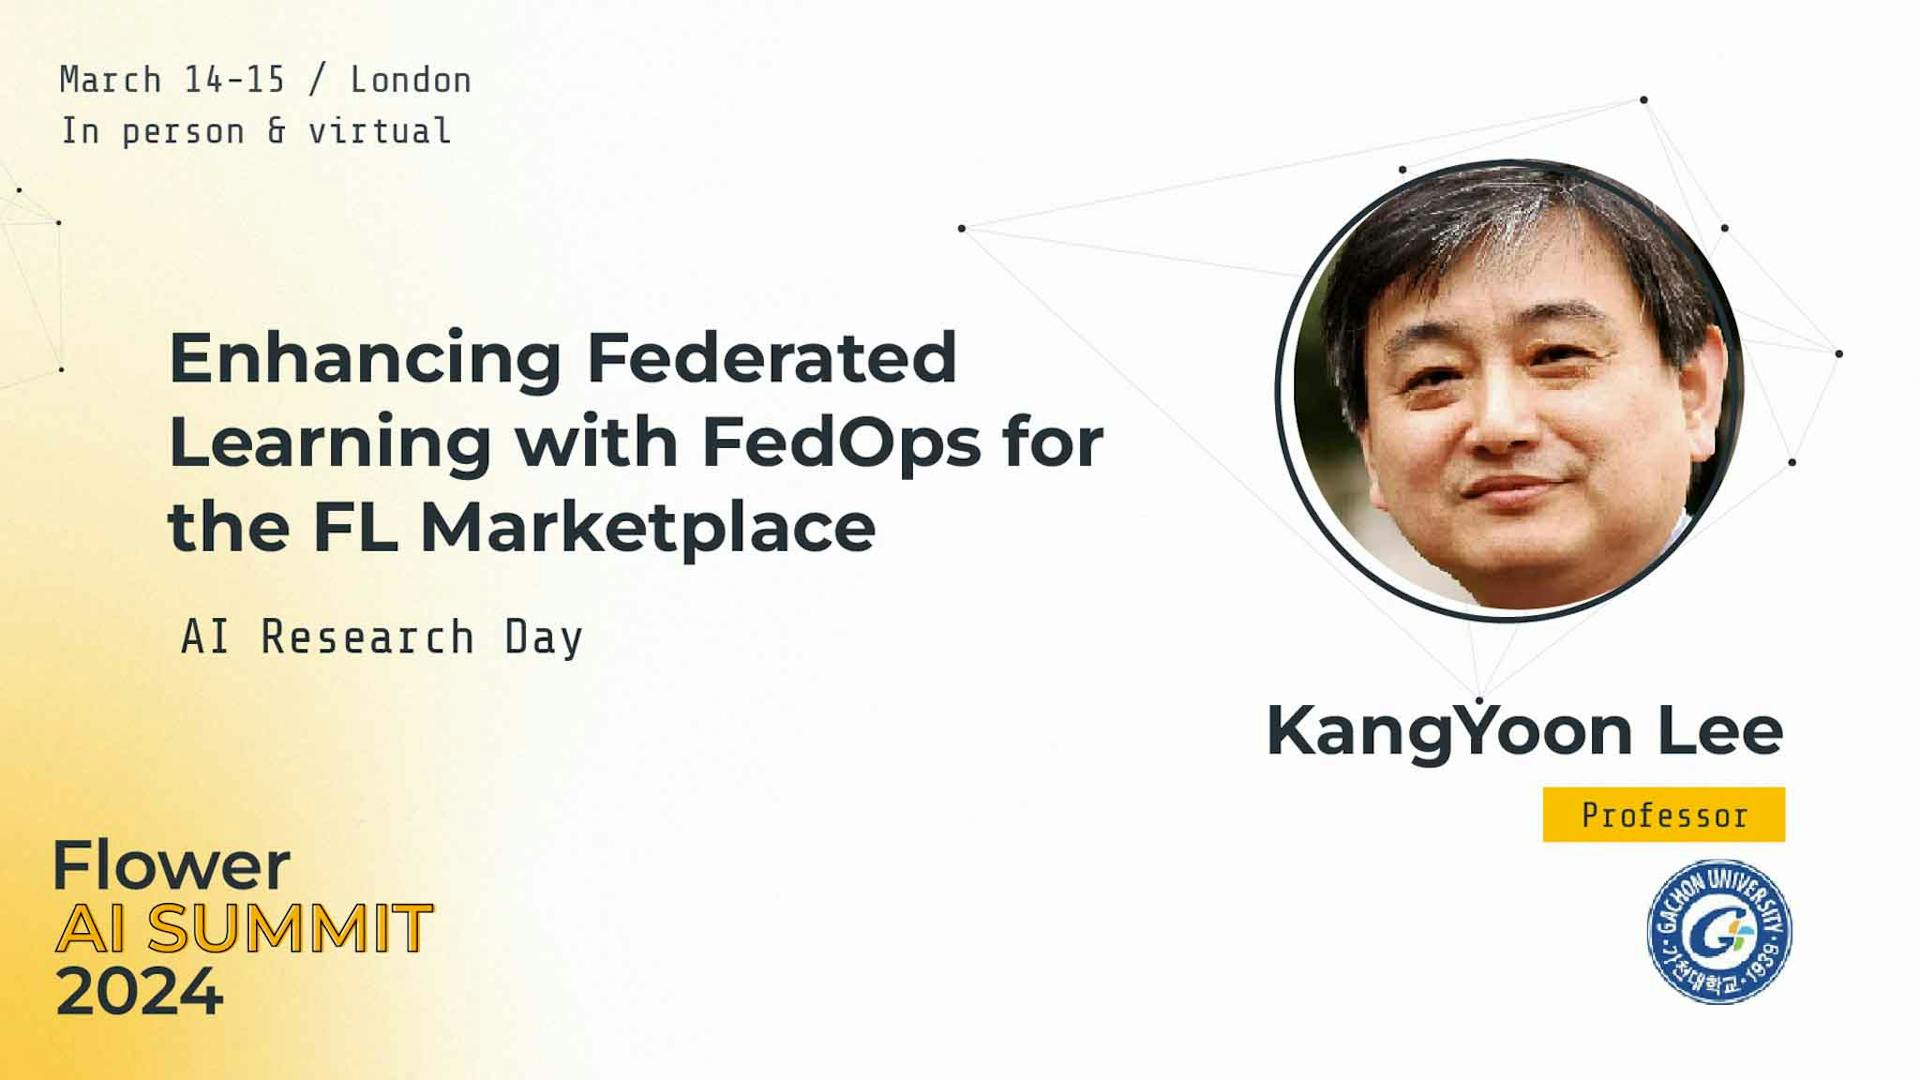 Enhancing Federated Learning with FedOps for the FL Marketplace, KangYoon Lee